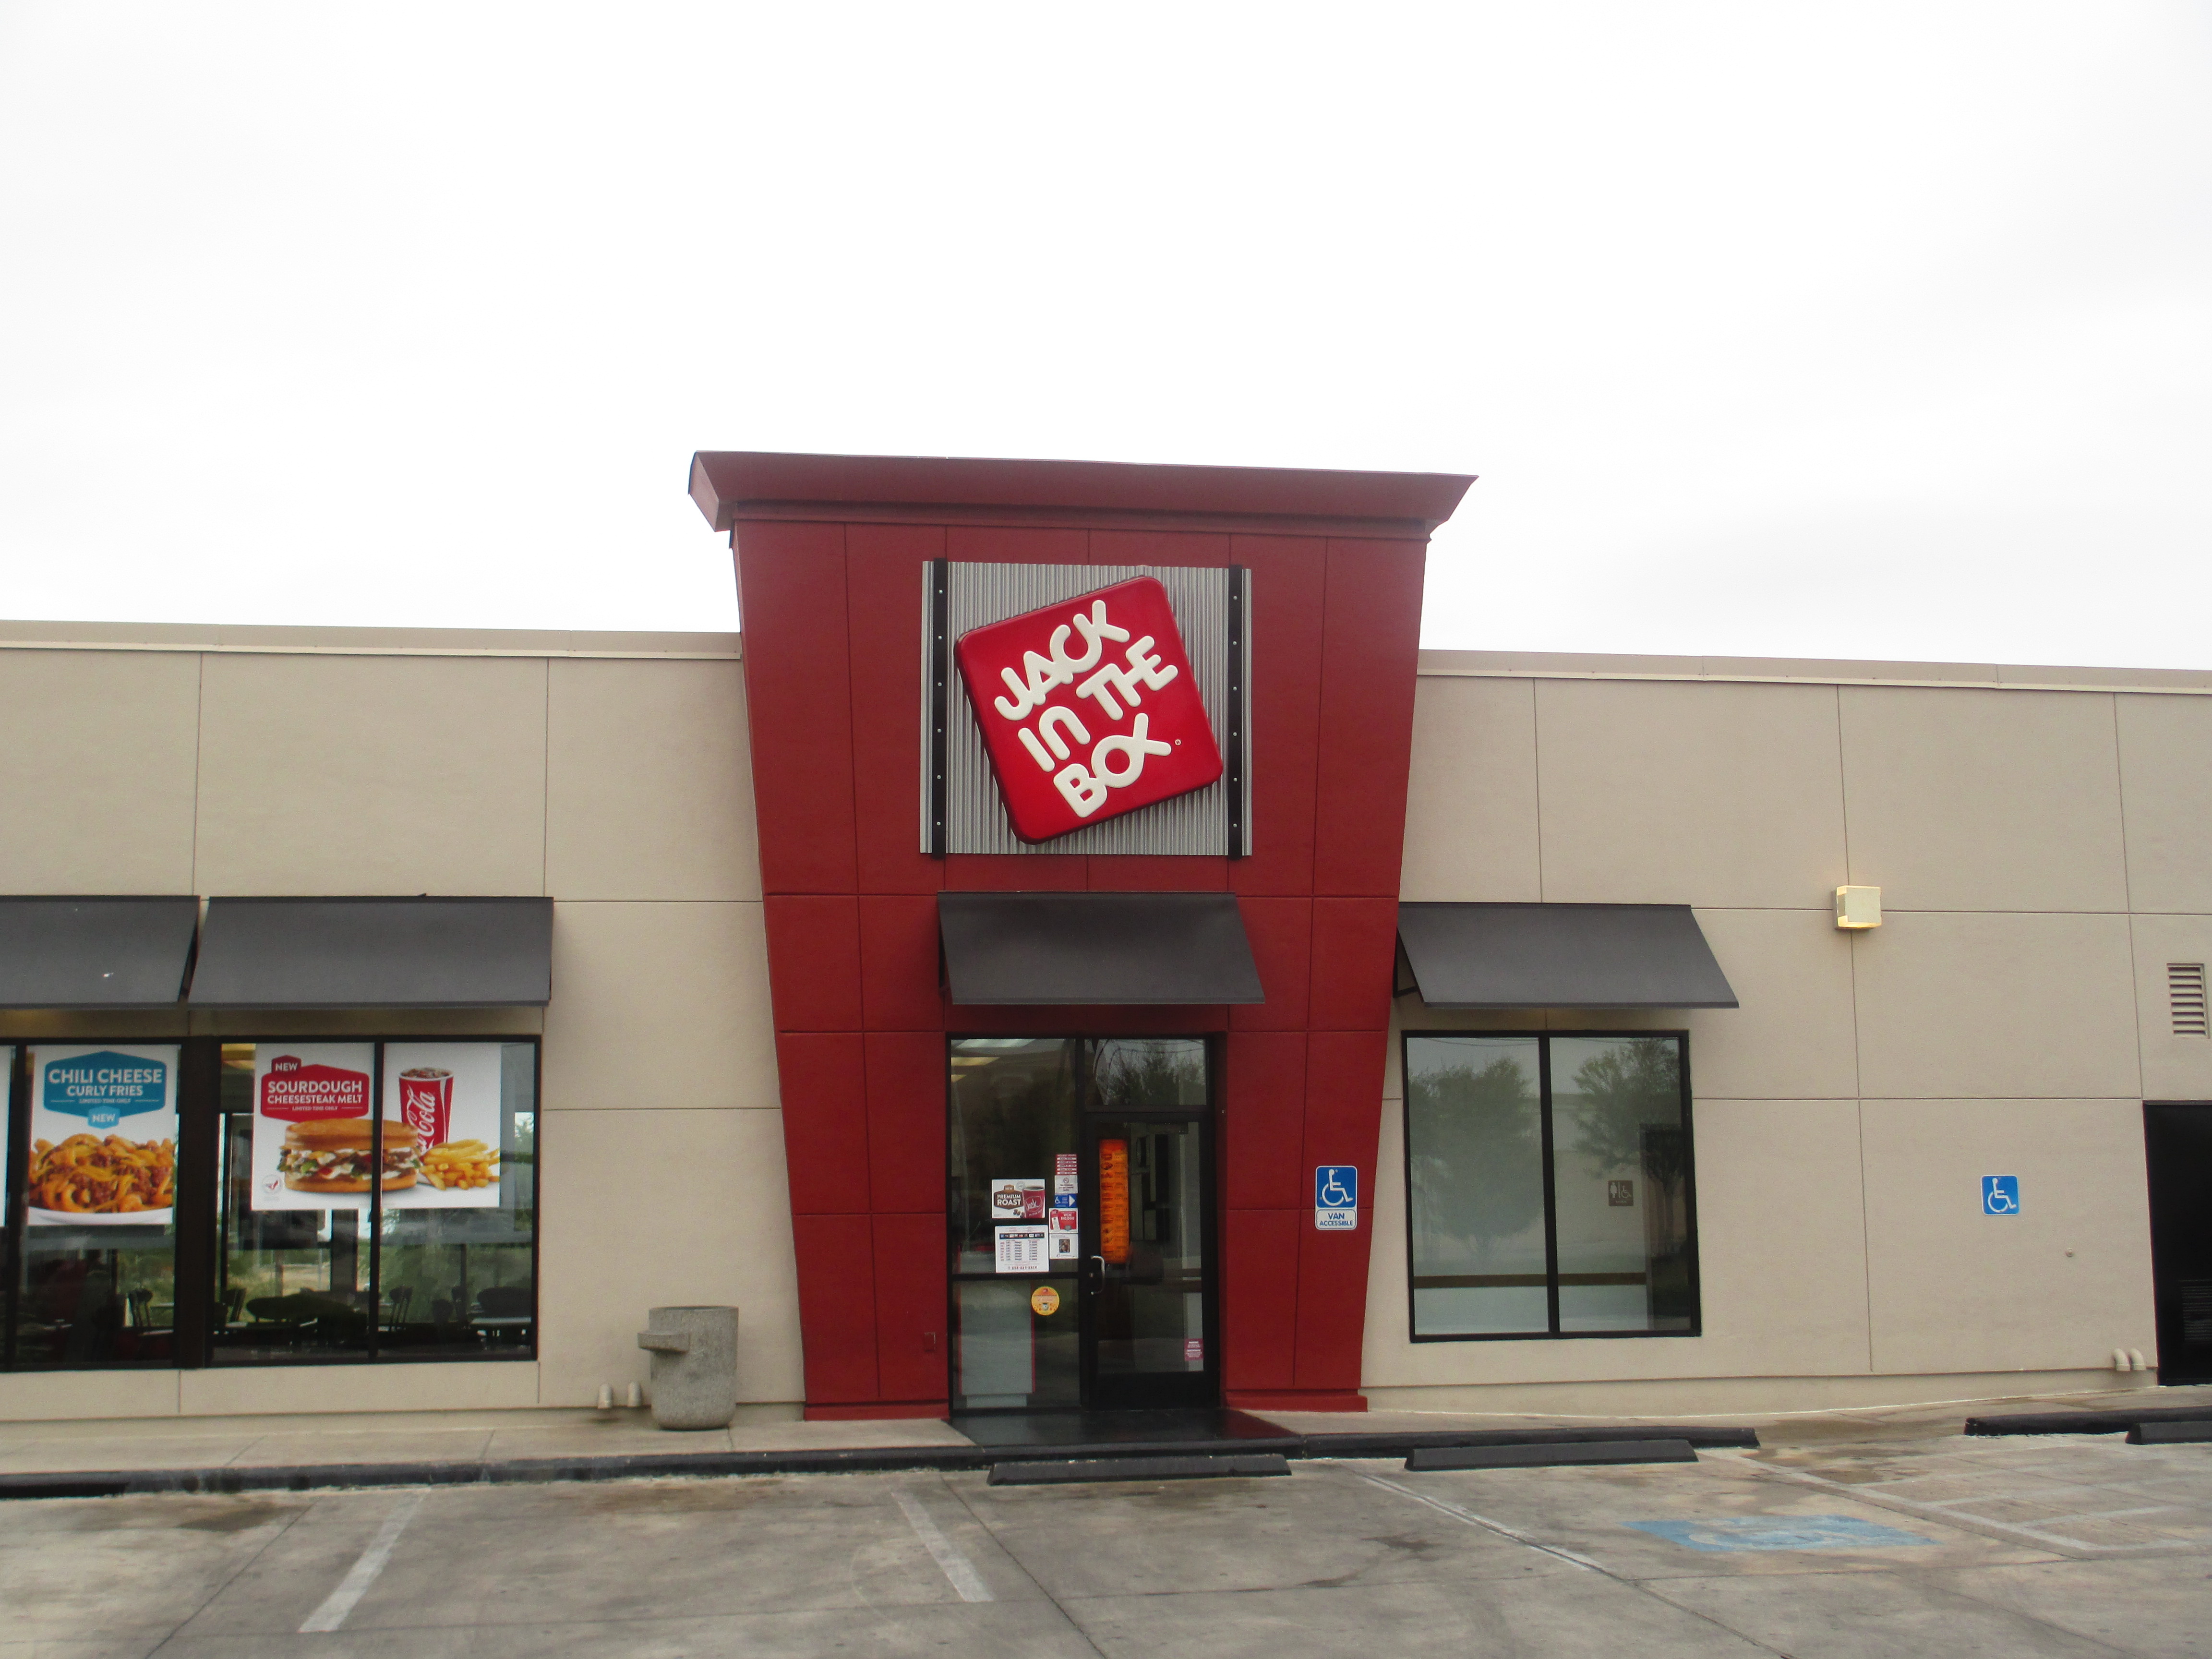 Jack In the Box overtime pay lawsuit